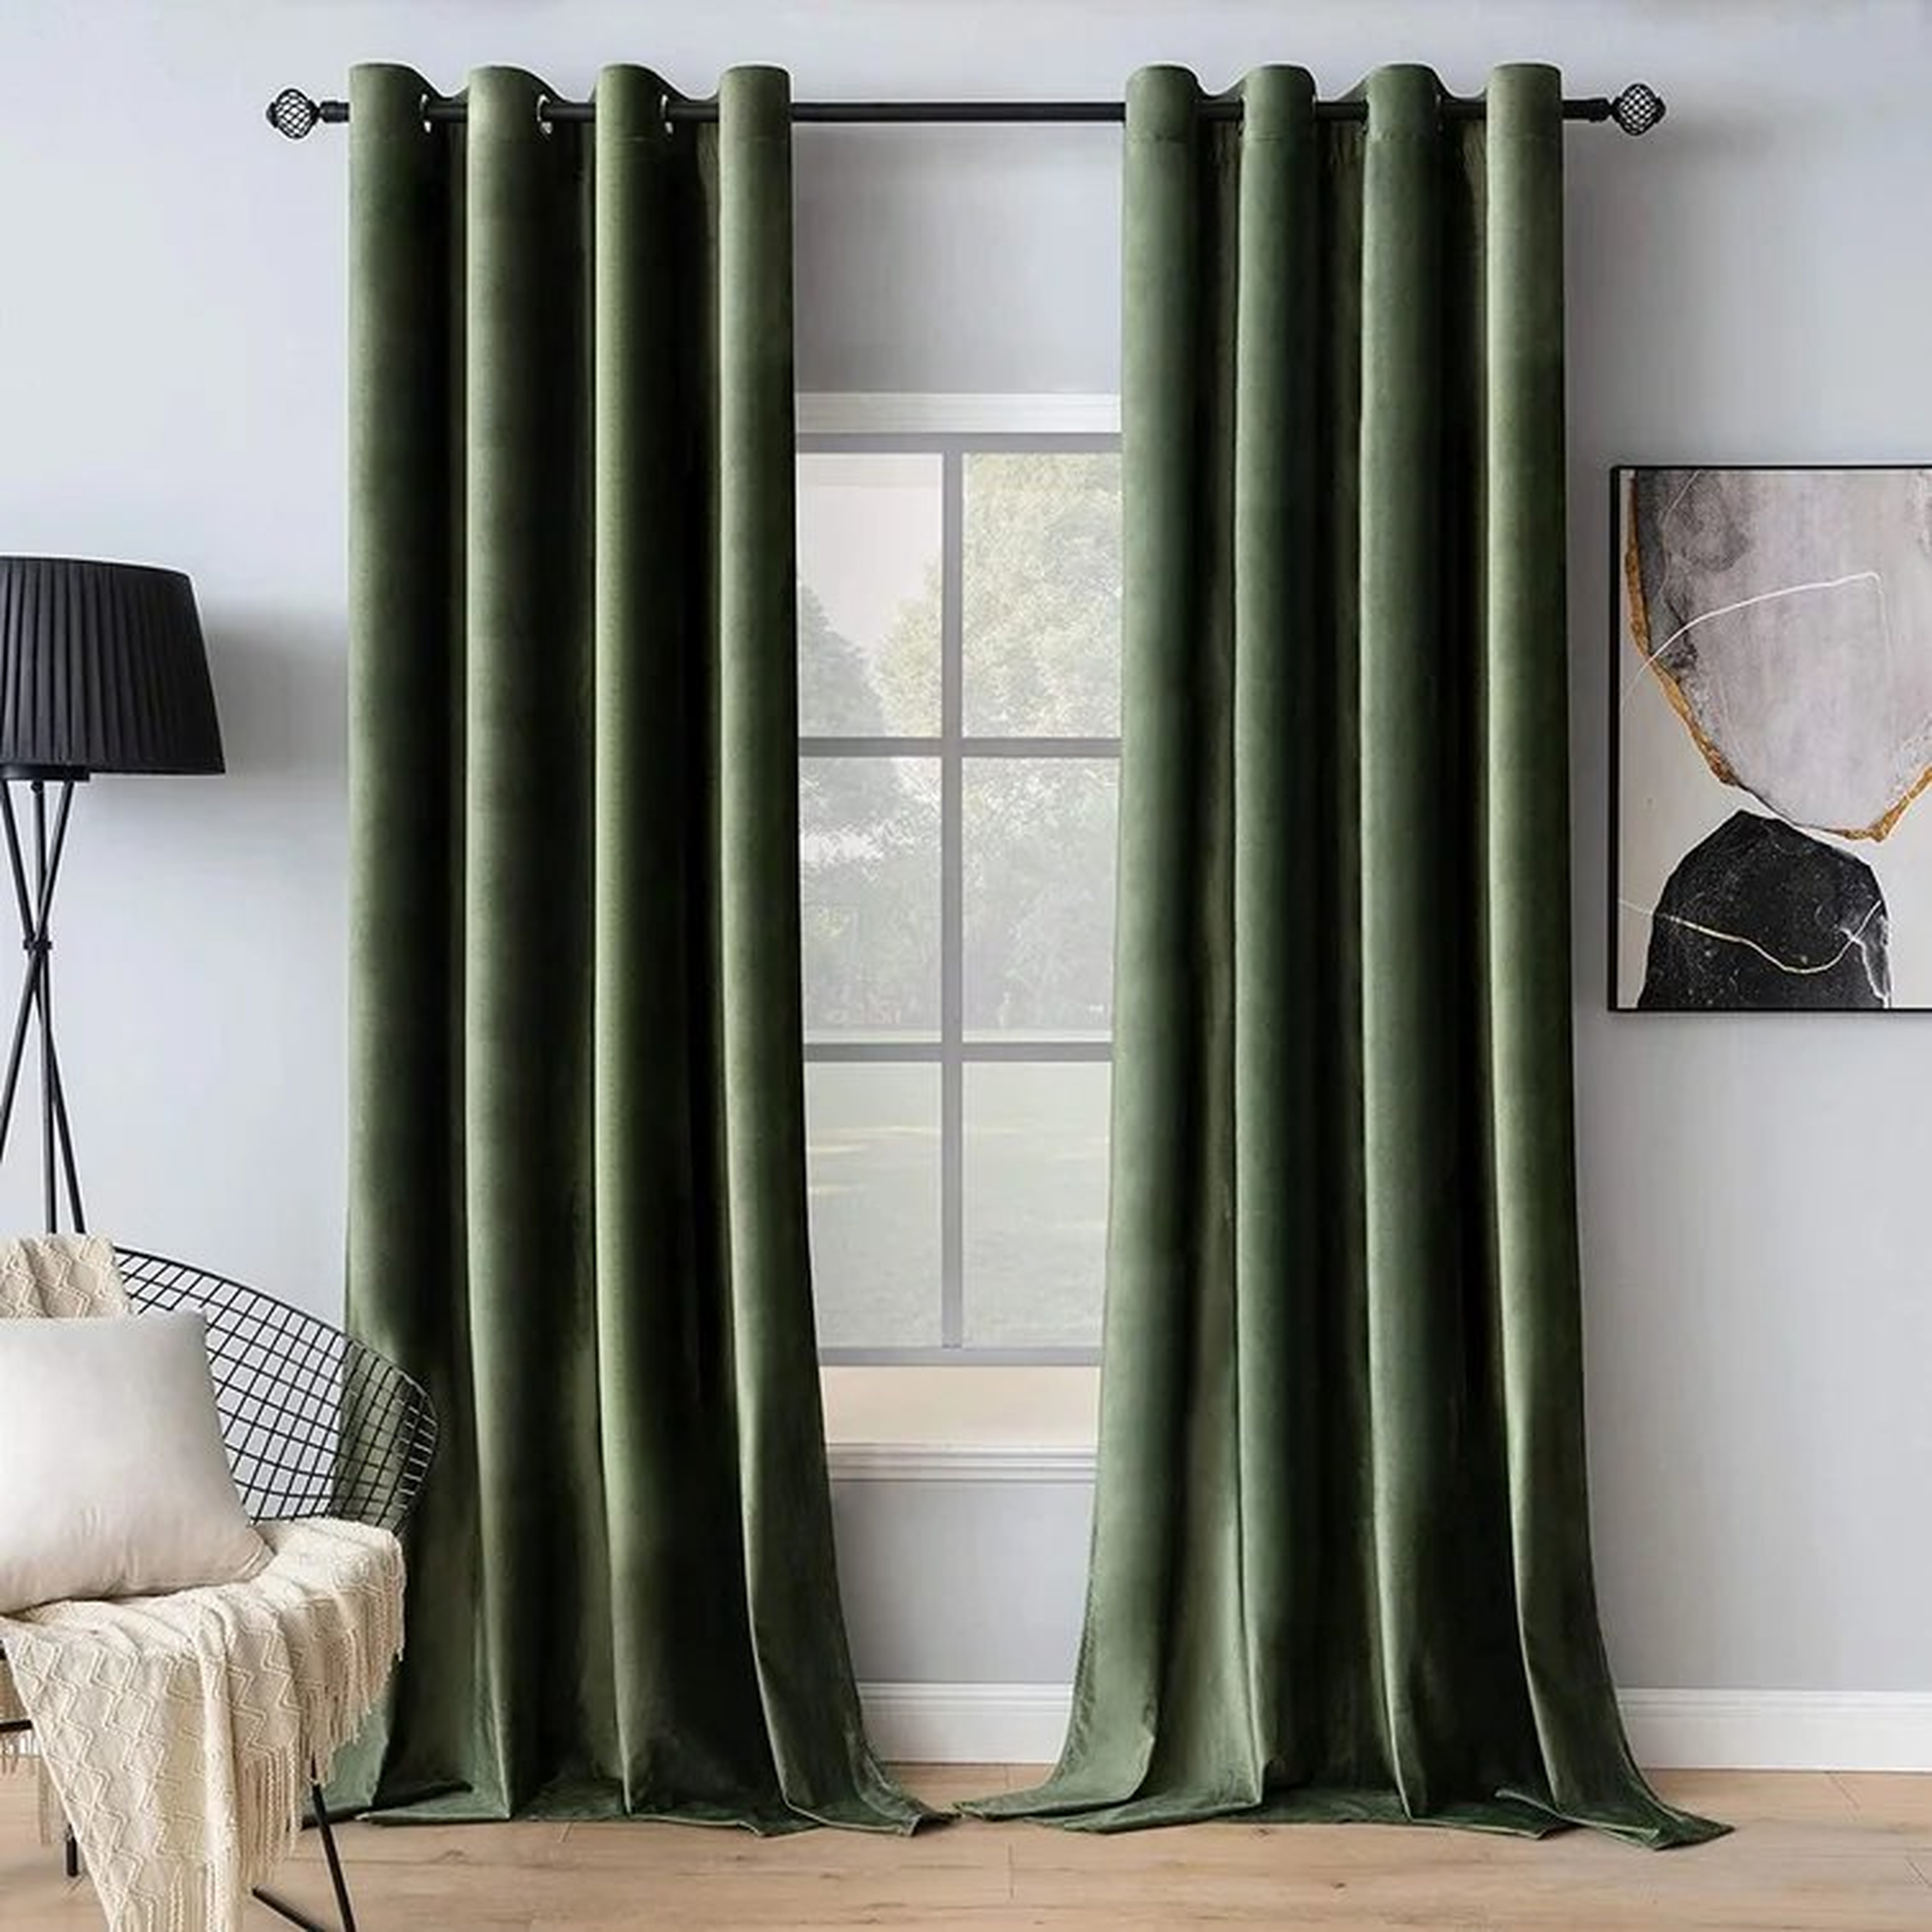 Velvet Curtains Elegant Grommet Curtains Thermal Insulated Soundproof Room Darkening Curtains / Drapes For Classical Living Room Bedroom - Wayfair